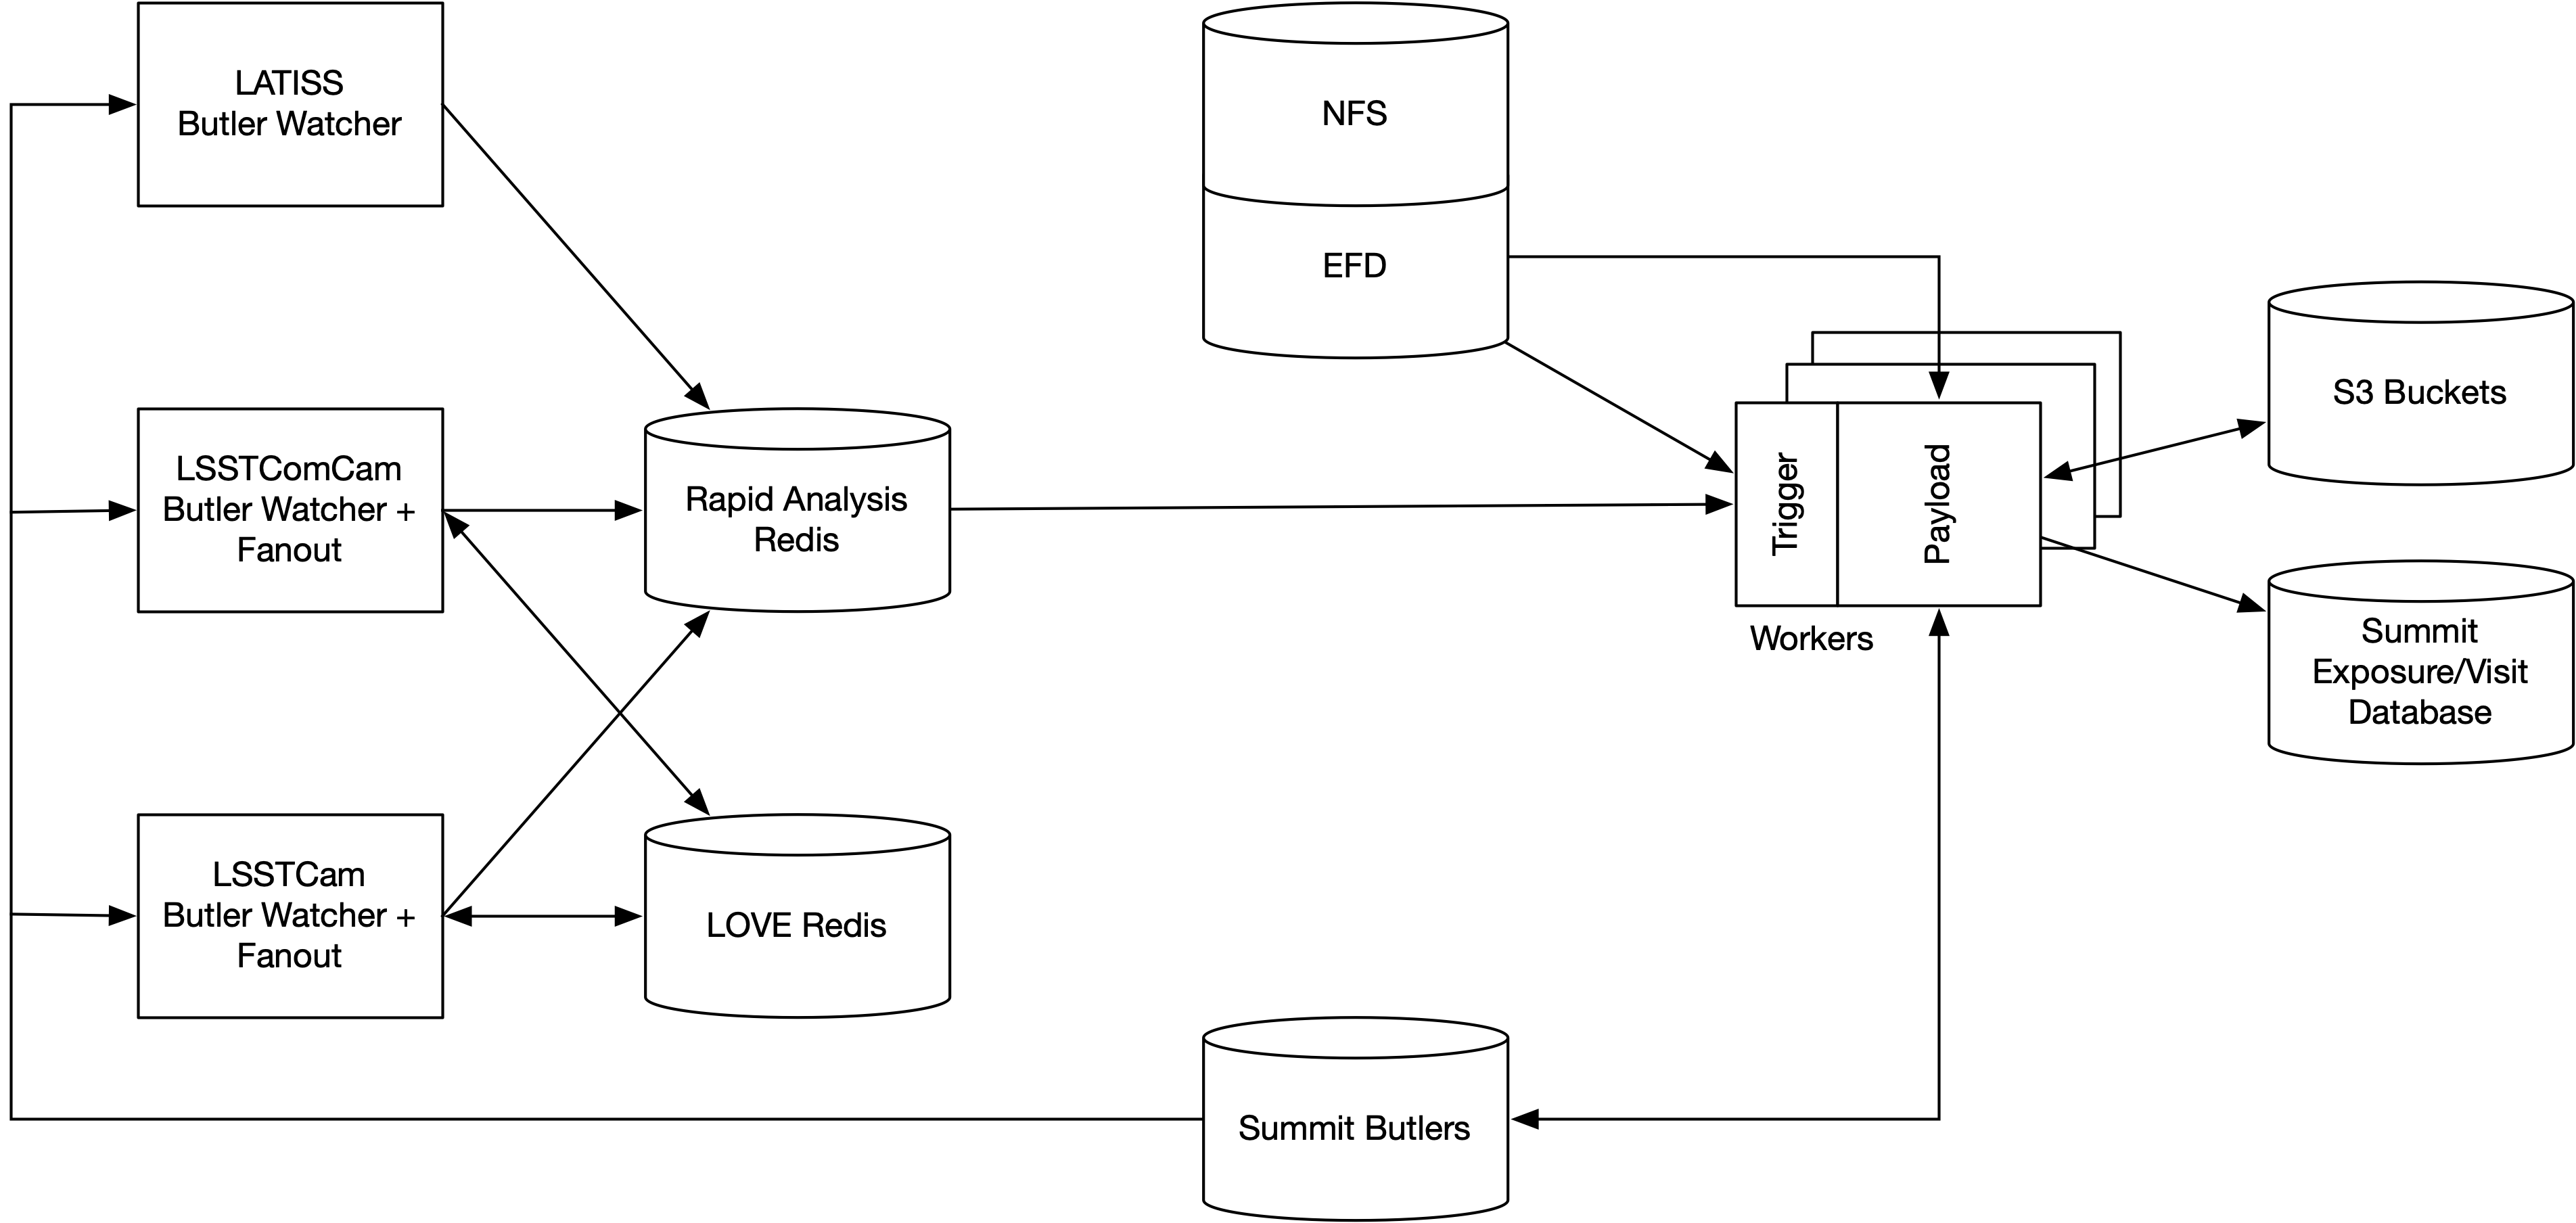 Diagram show work distribution via redis, processing control, and data flow from Rapid Analysis to RubinTV.